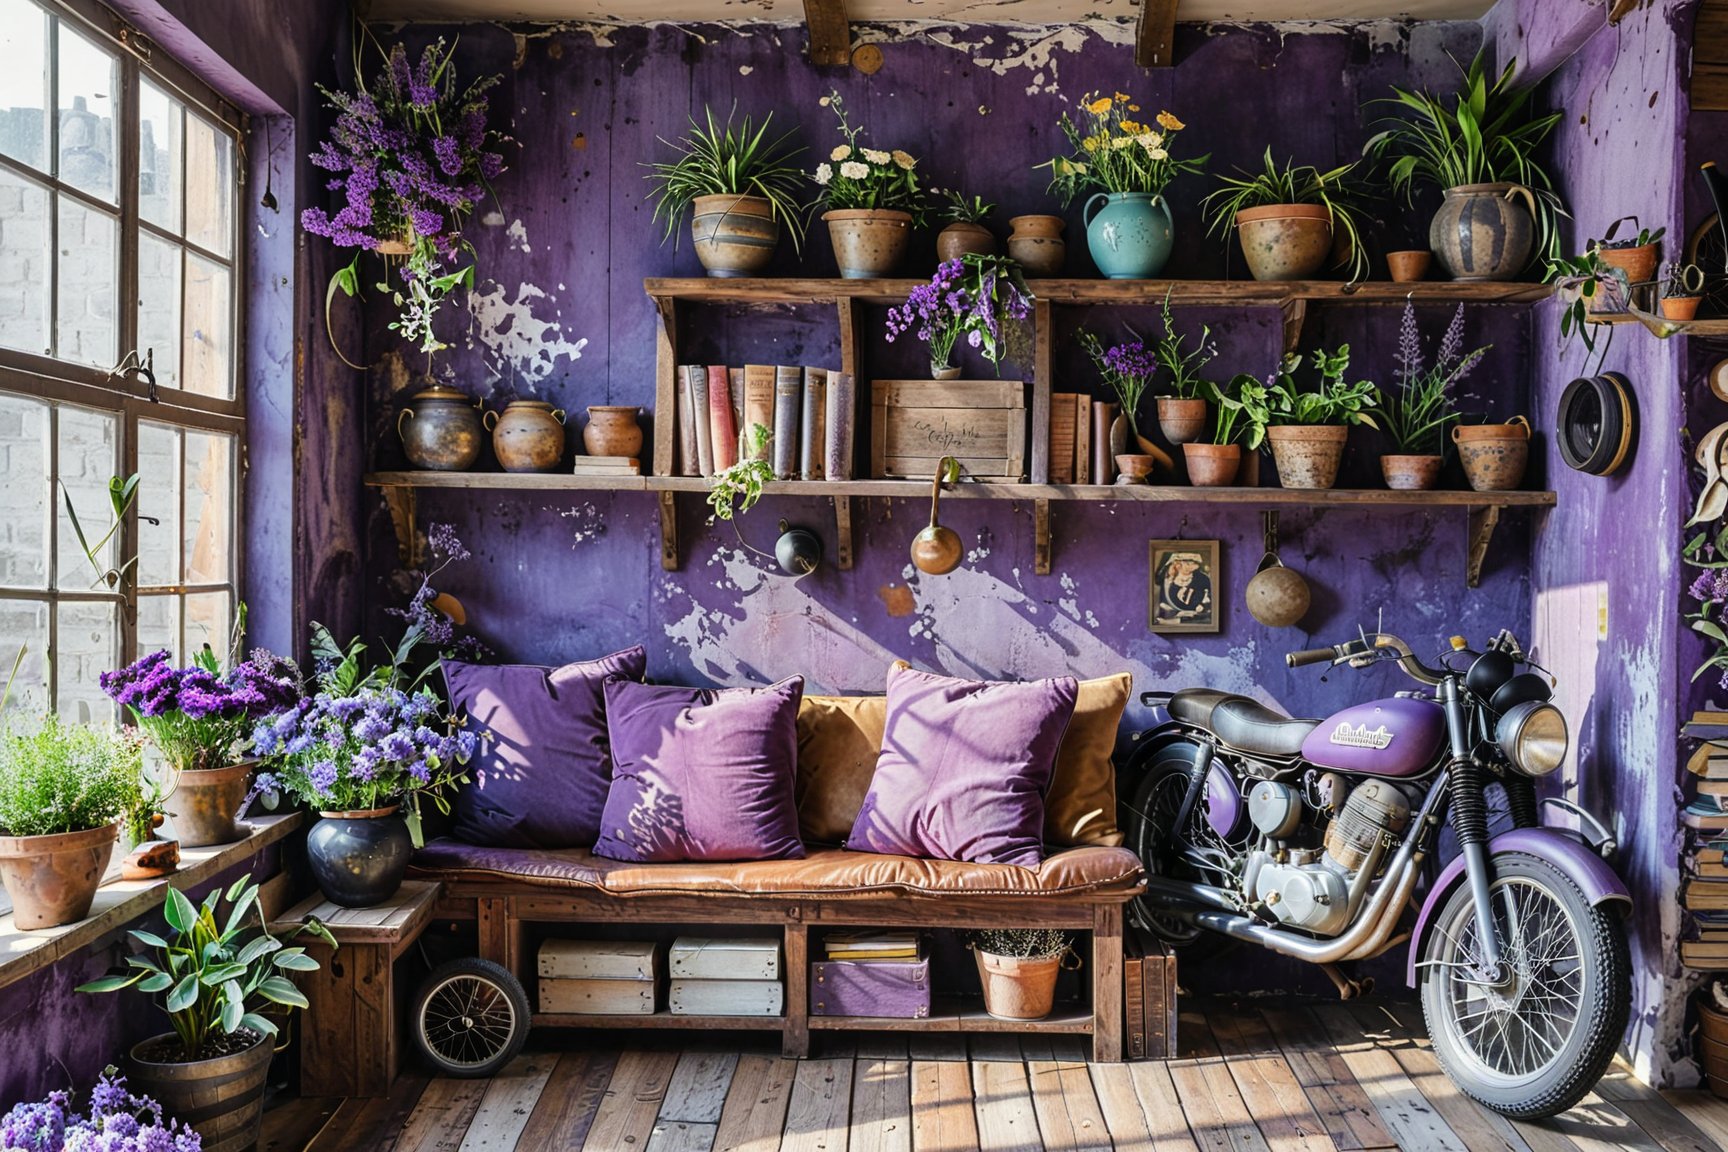 A cozy corner of a room with rustic and vintage decor. A wooden bench with cushions is placed near a window, adorned with potted plants. Above the bench, wooden shelves hold a variety of items, including books, pots, and a bicycle. The walls have a distressed purple finish with patches and holes. A vintage motorcycle leans against the wall, and a bouquet of purple flowers adds a splash of color. The room exudes a sense of nostalgia and comfort.